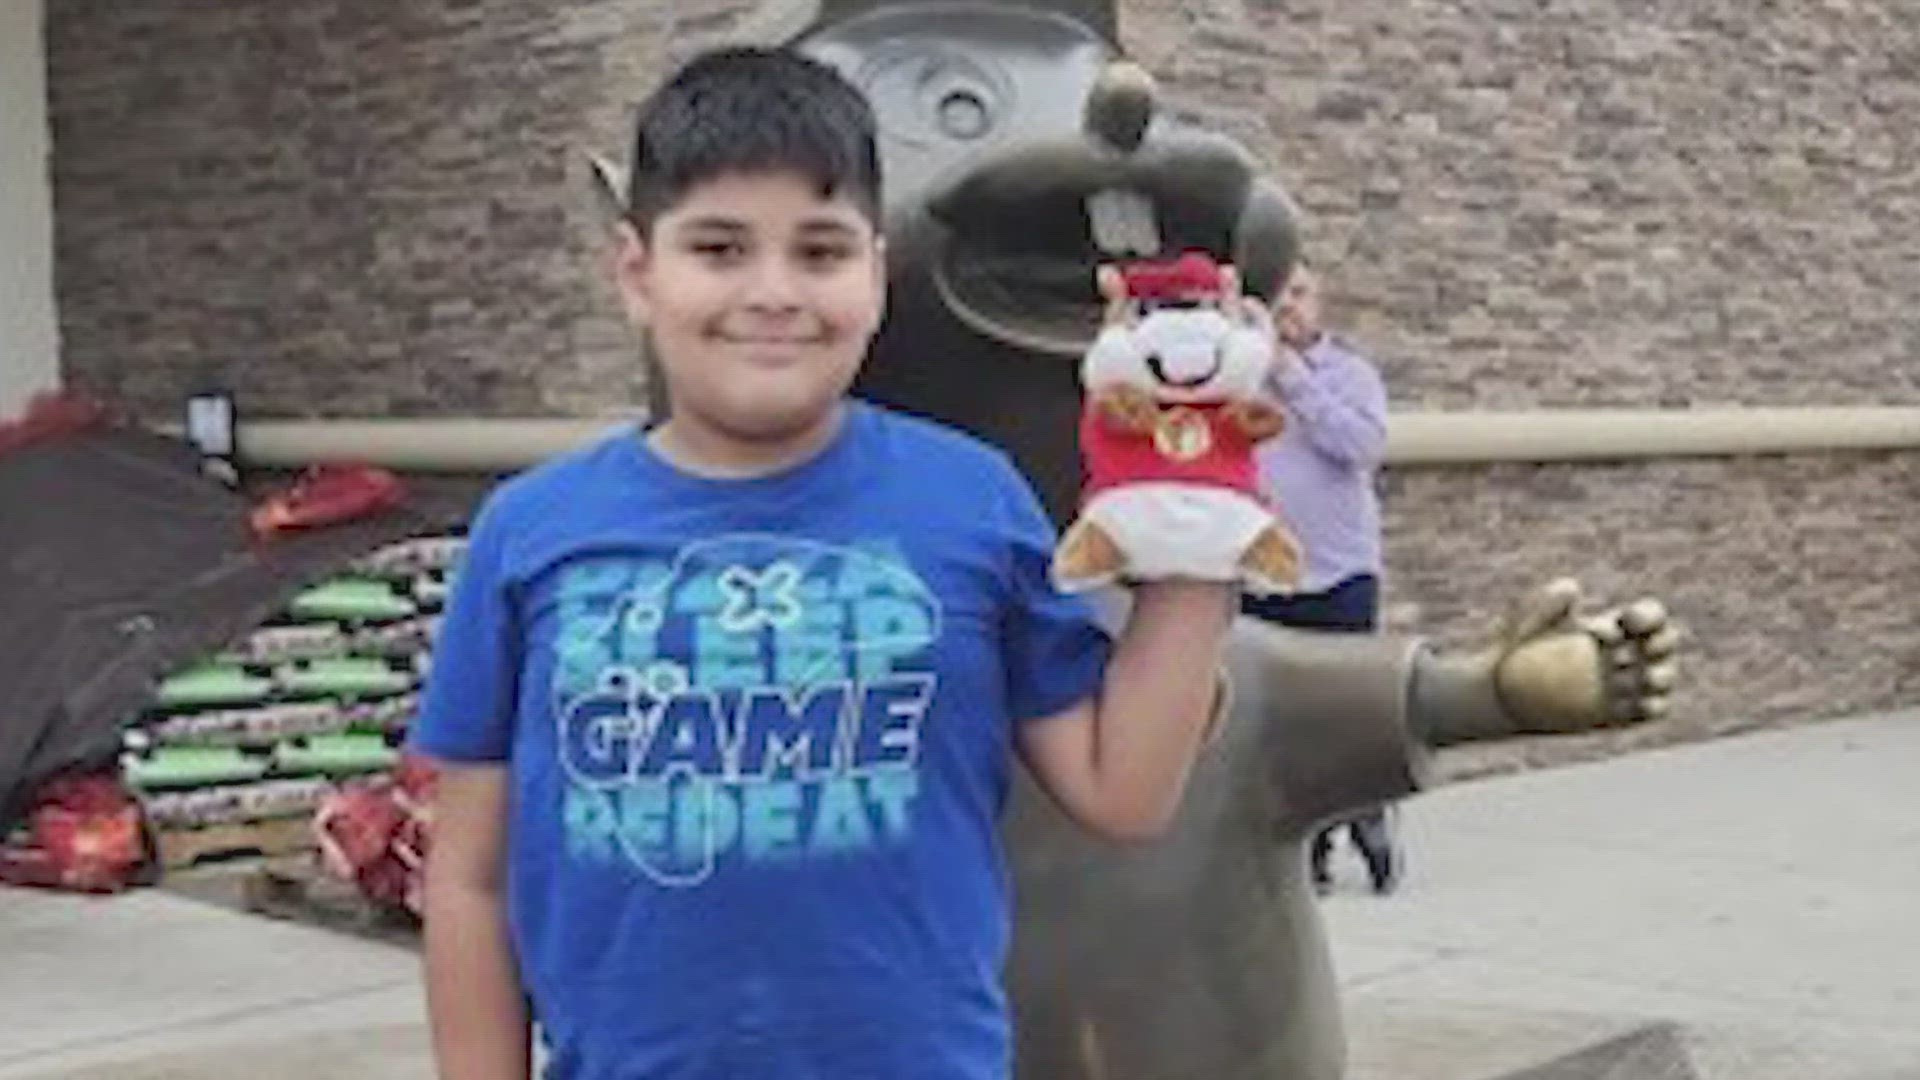 A prayer vigil was held Thursday for Aguilar, 10, and his mother, 48-year-old Zuleika Lopez, who was killed by Aguilar's father before he was abducted, police say.